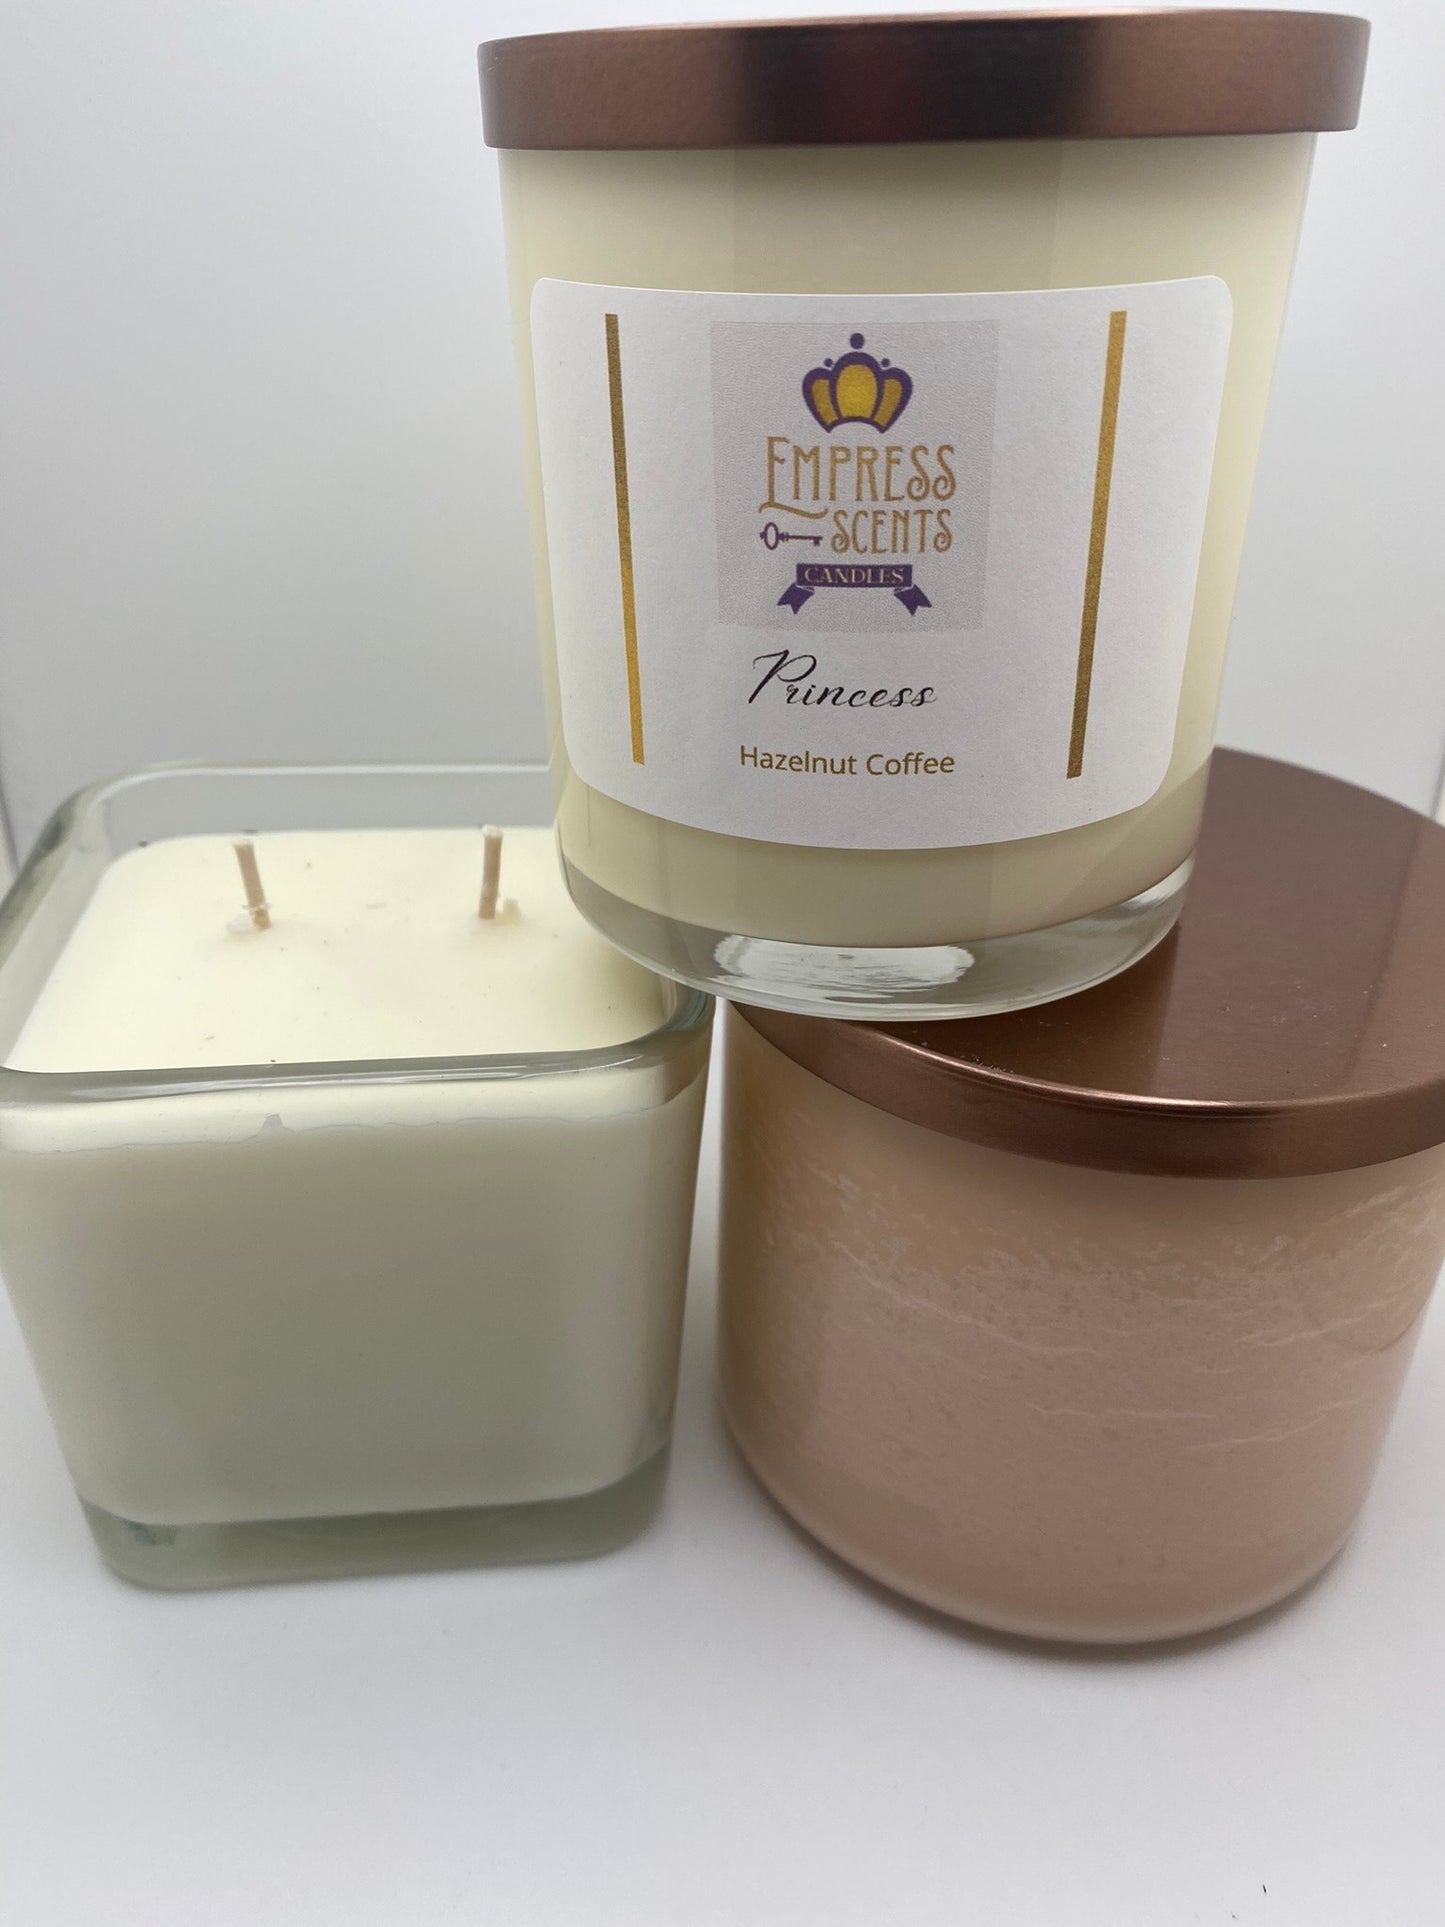 one cylindrical candle jar with white candle wax, one cylindrical candle jar with light brown candle wax, one cube-shaped jar with white candle wax